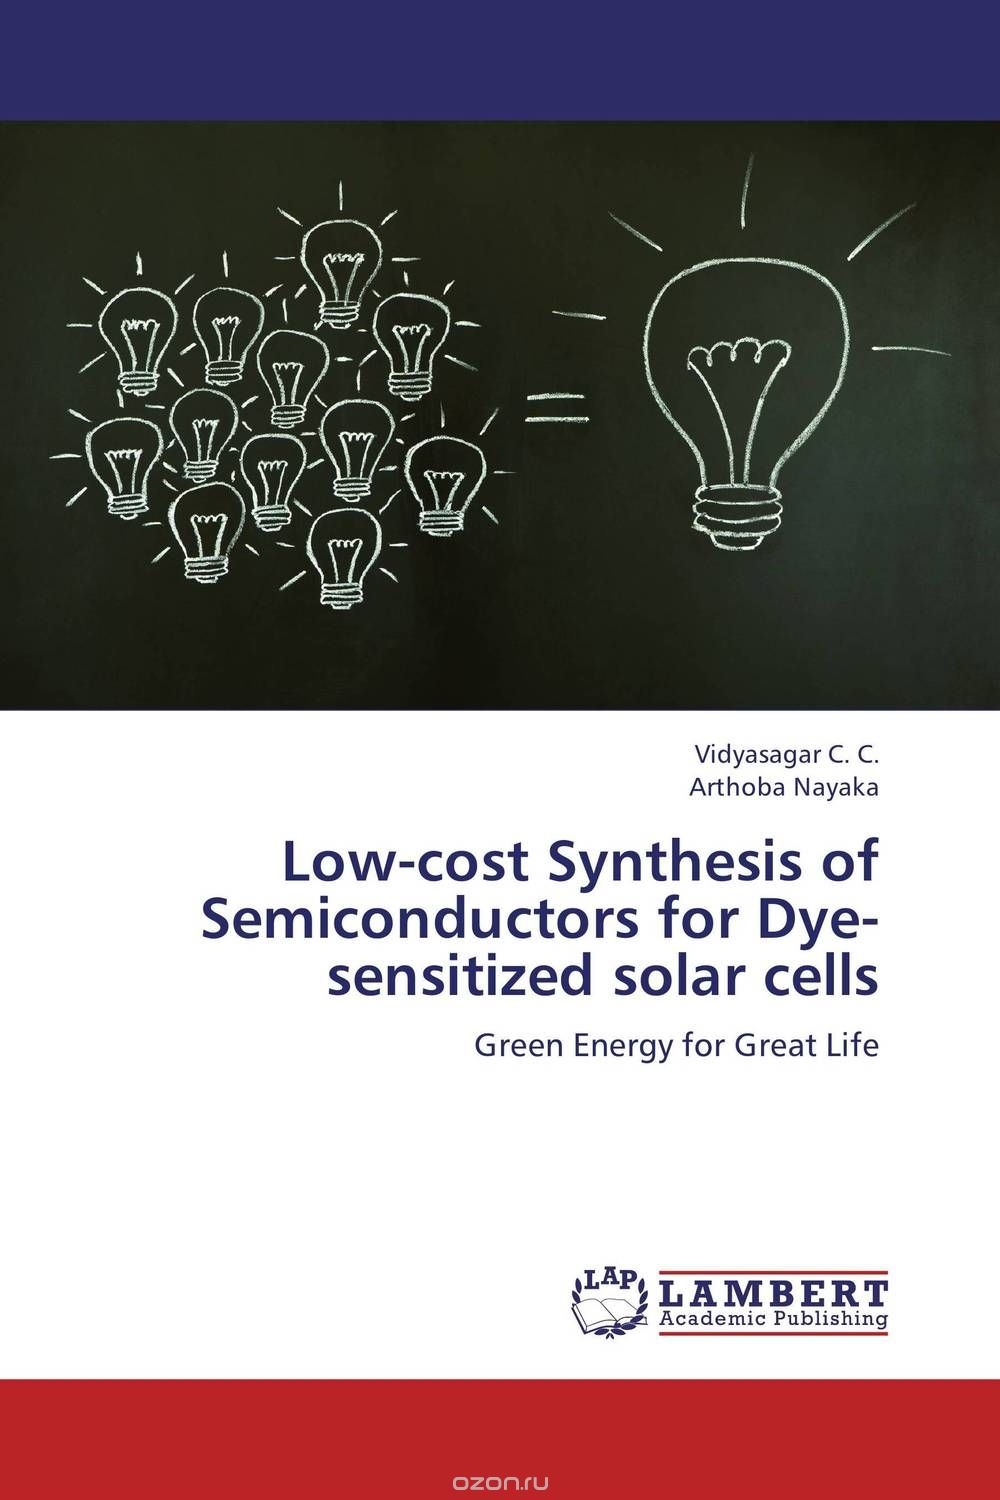 Скачать книгу "Low-cost Synthesis of Semiconductors for Dye-sensitized solar cells"